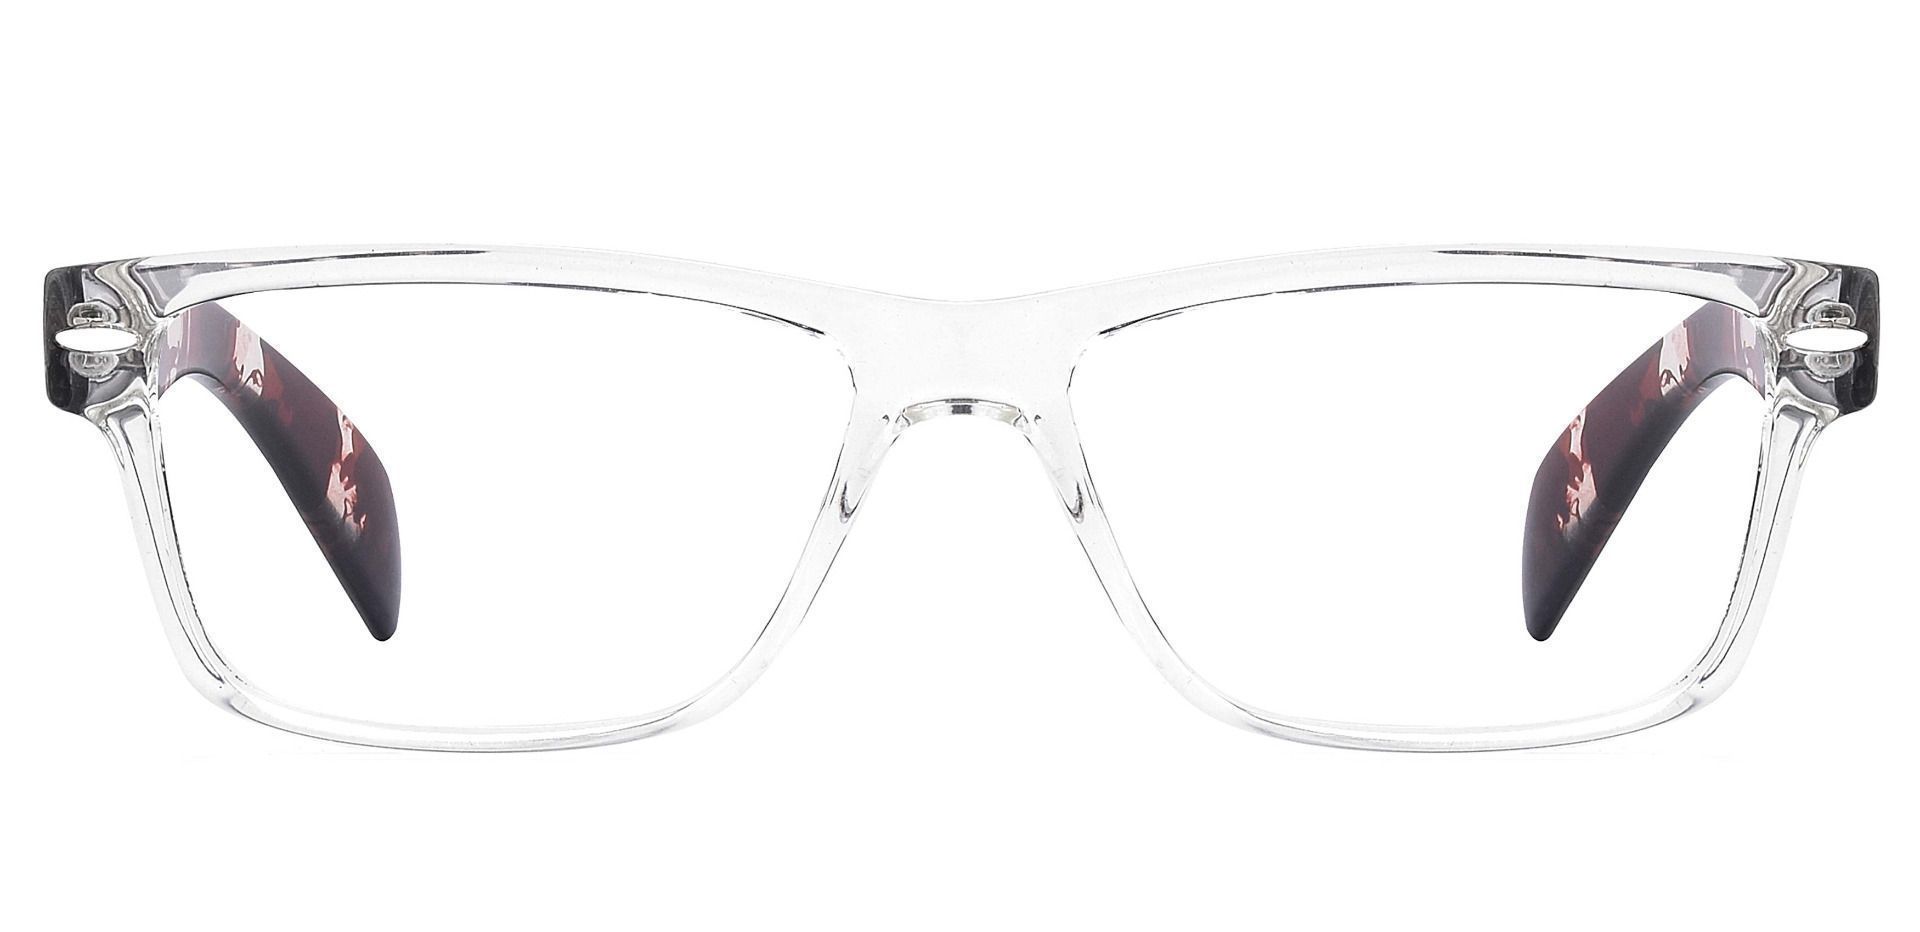 Tate Rectangle Blue Light Blocking Glasses - The Frame Is Clear And Tortoise